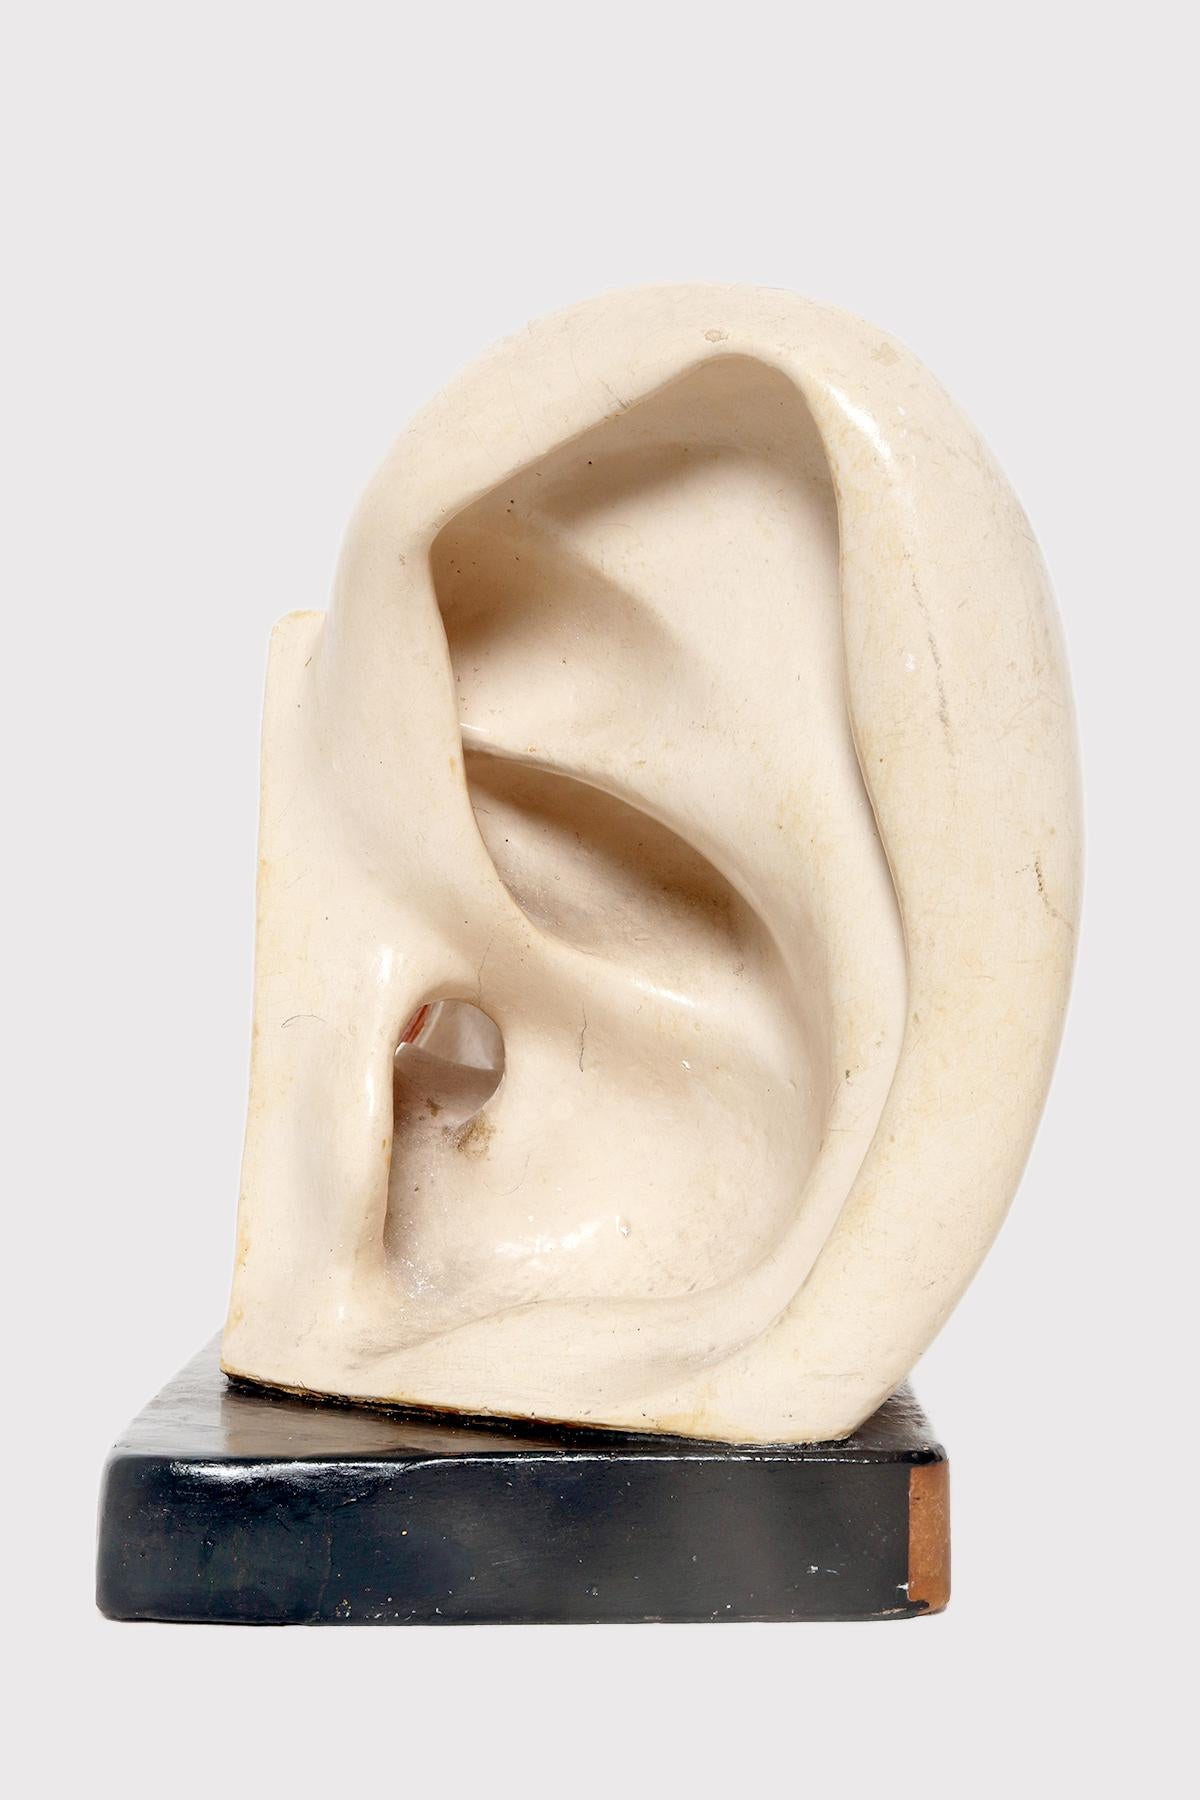 Anatomical model for class, depicting an external and inner ear, made out of painted papier plaster, mounted on a black painted plaster rectangular base. Sold from Paravia, Italy, to Ministery of puplic instruction for didactic use. Produced in